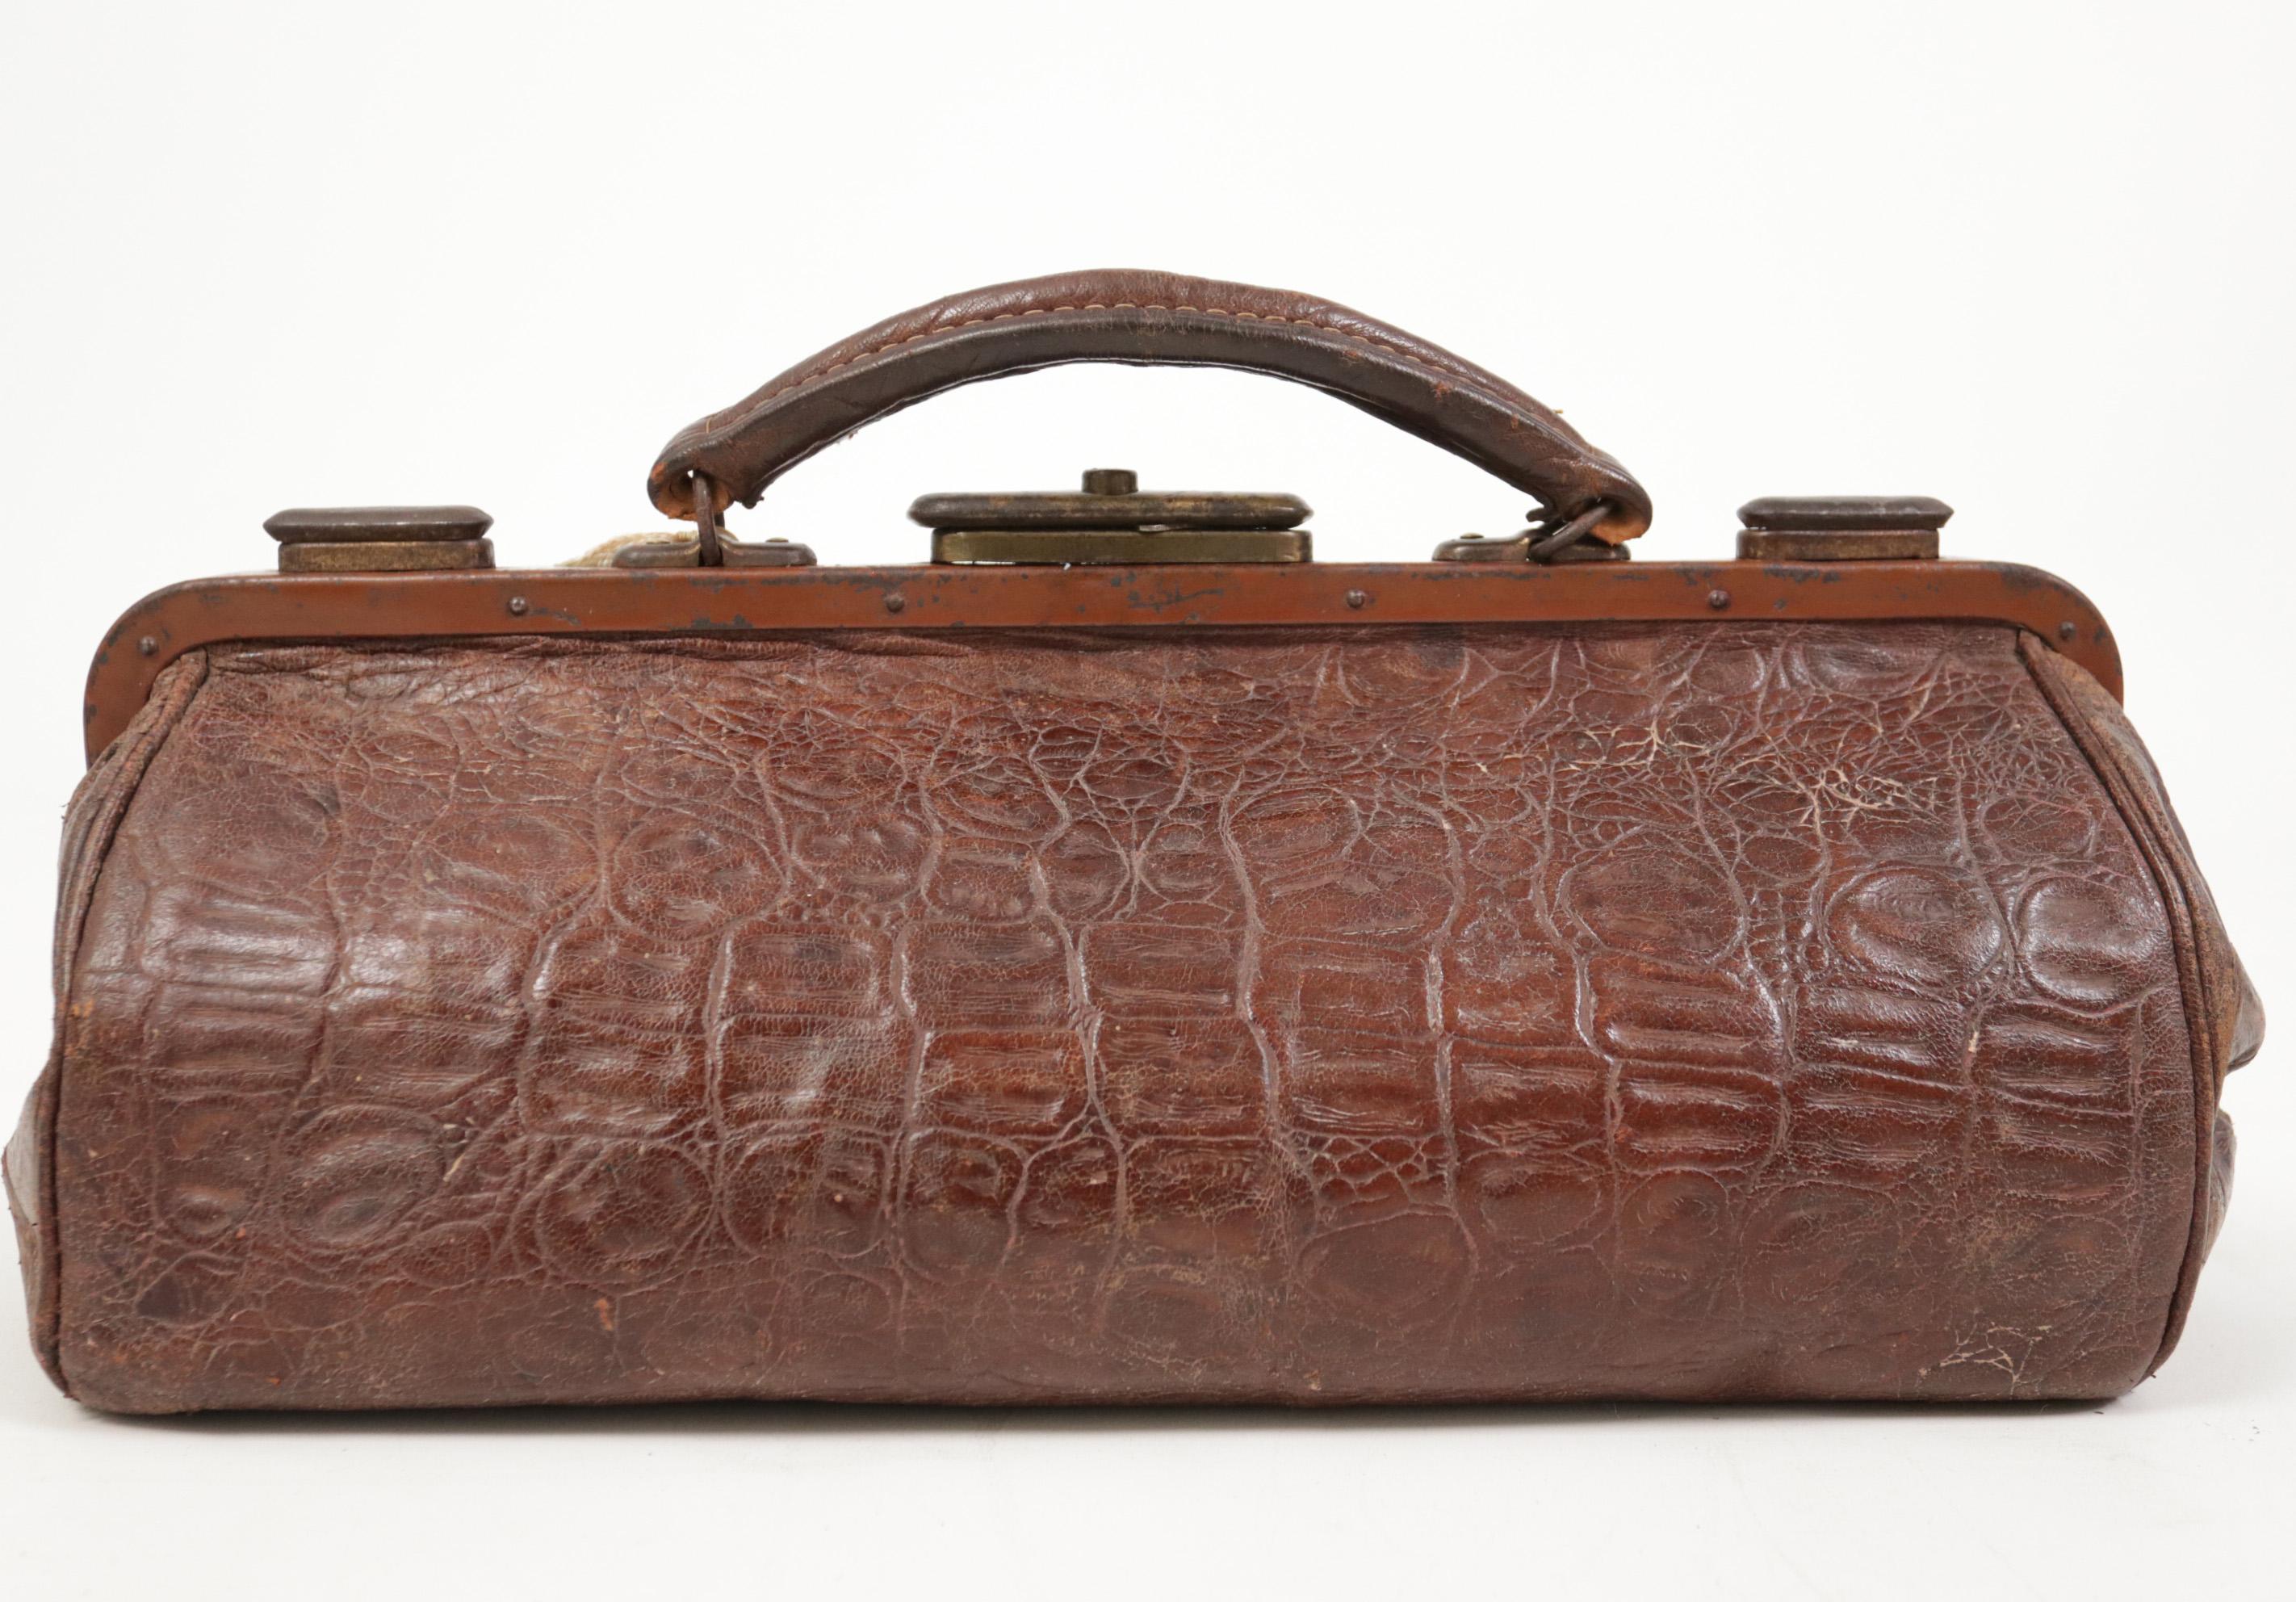 Early 20th Century French Art Deco Embossed Crocodile Leather Doctor’s Bag, c. 1920 For Sale